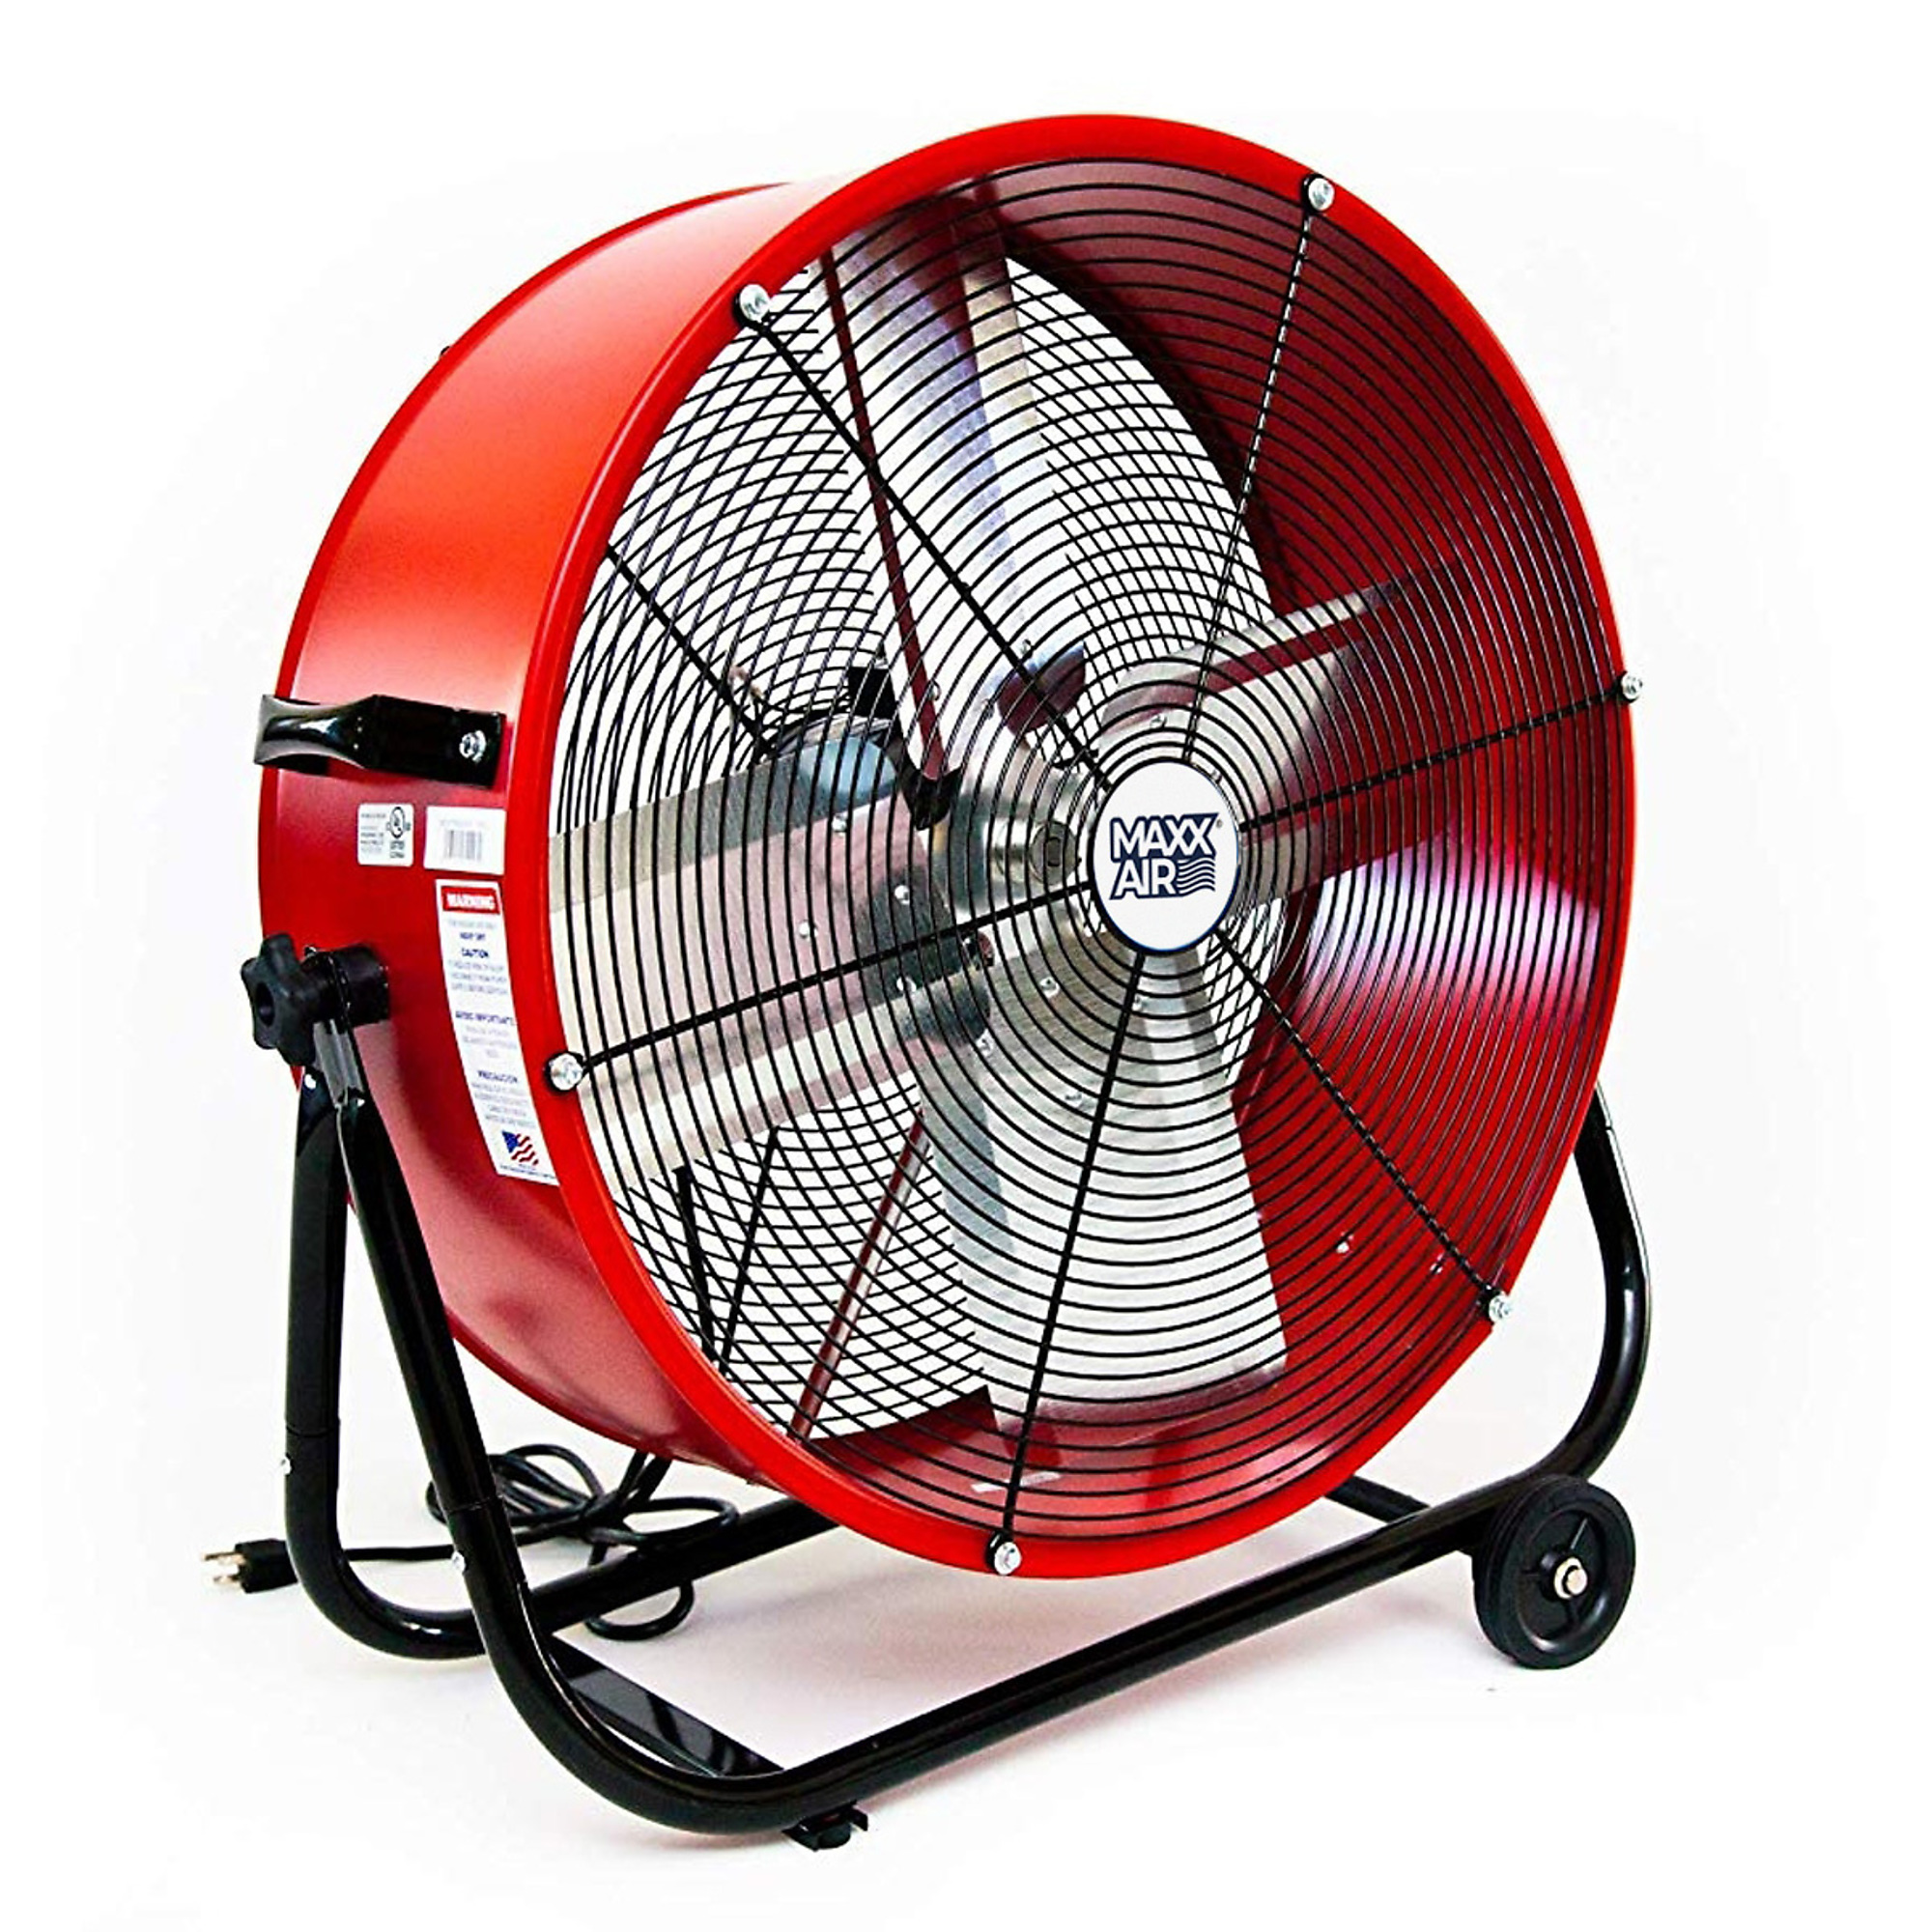 MaxxAir, 24Inch 2-Speed Tilting Direct Drive Drum Fan, Red, Fan Diameter 24 in, Air Delivery 4000 cfm, Volts 120 Model BF24TFREDUPS